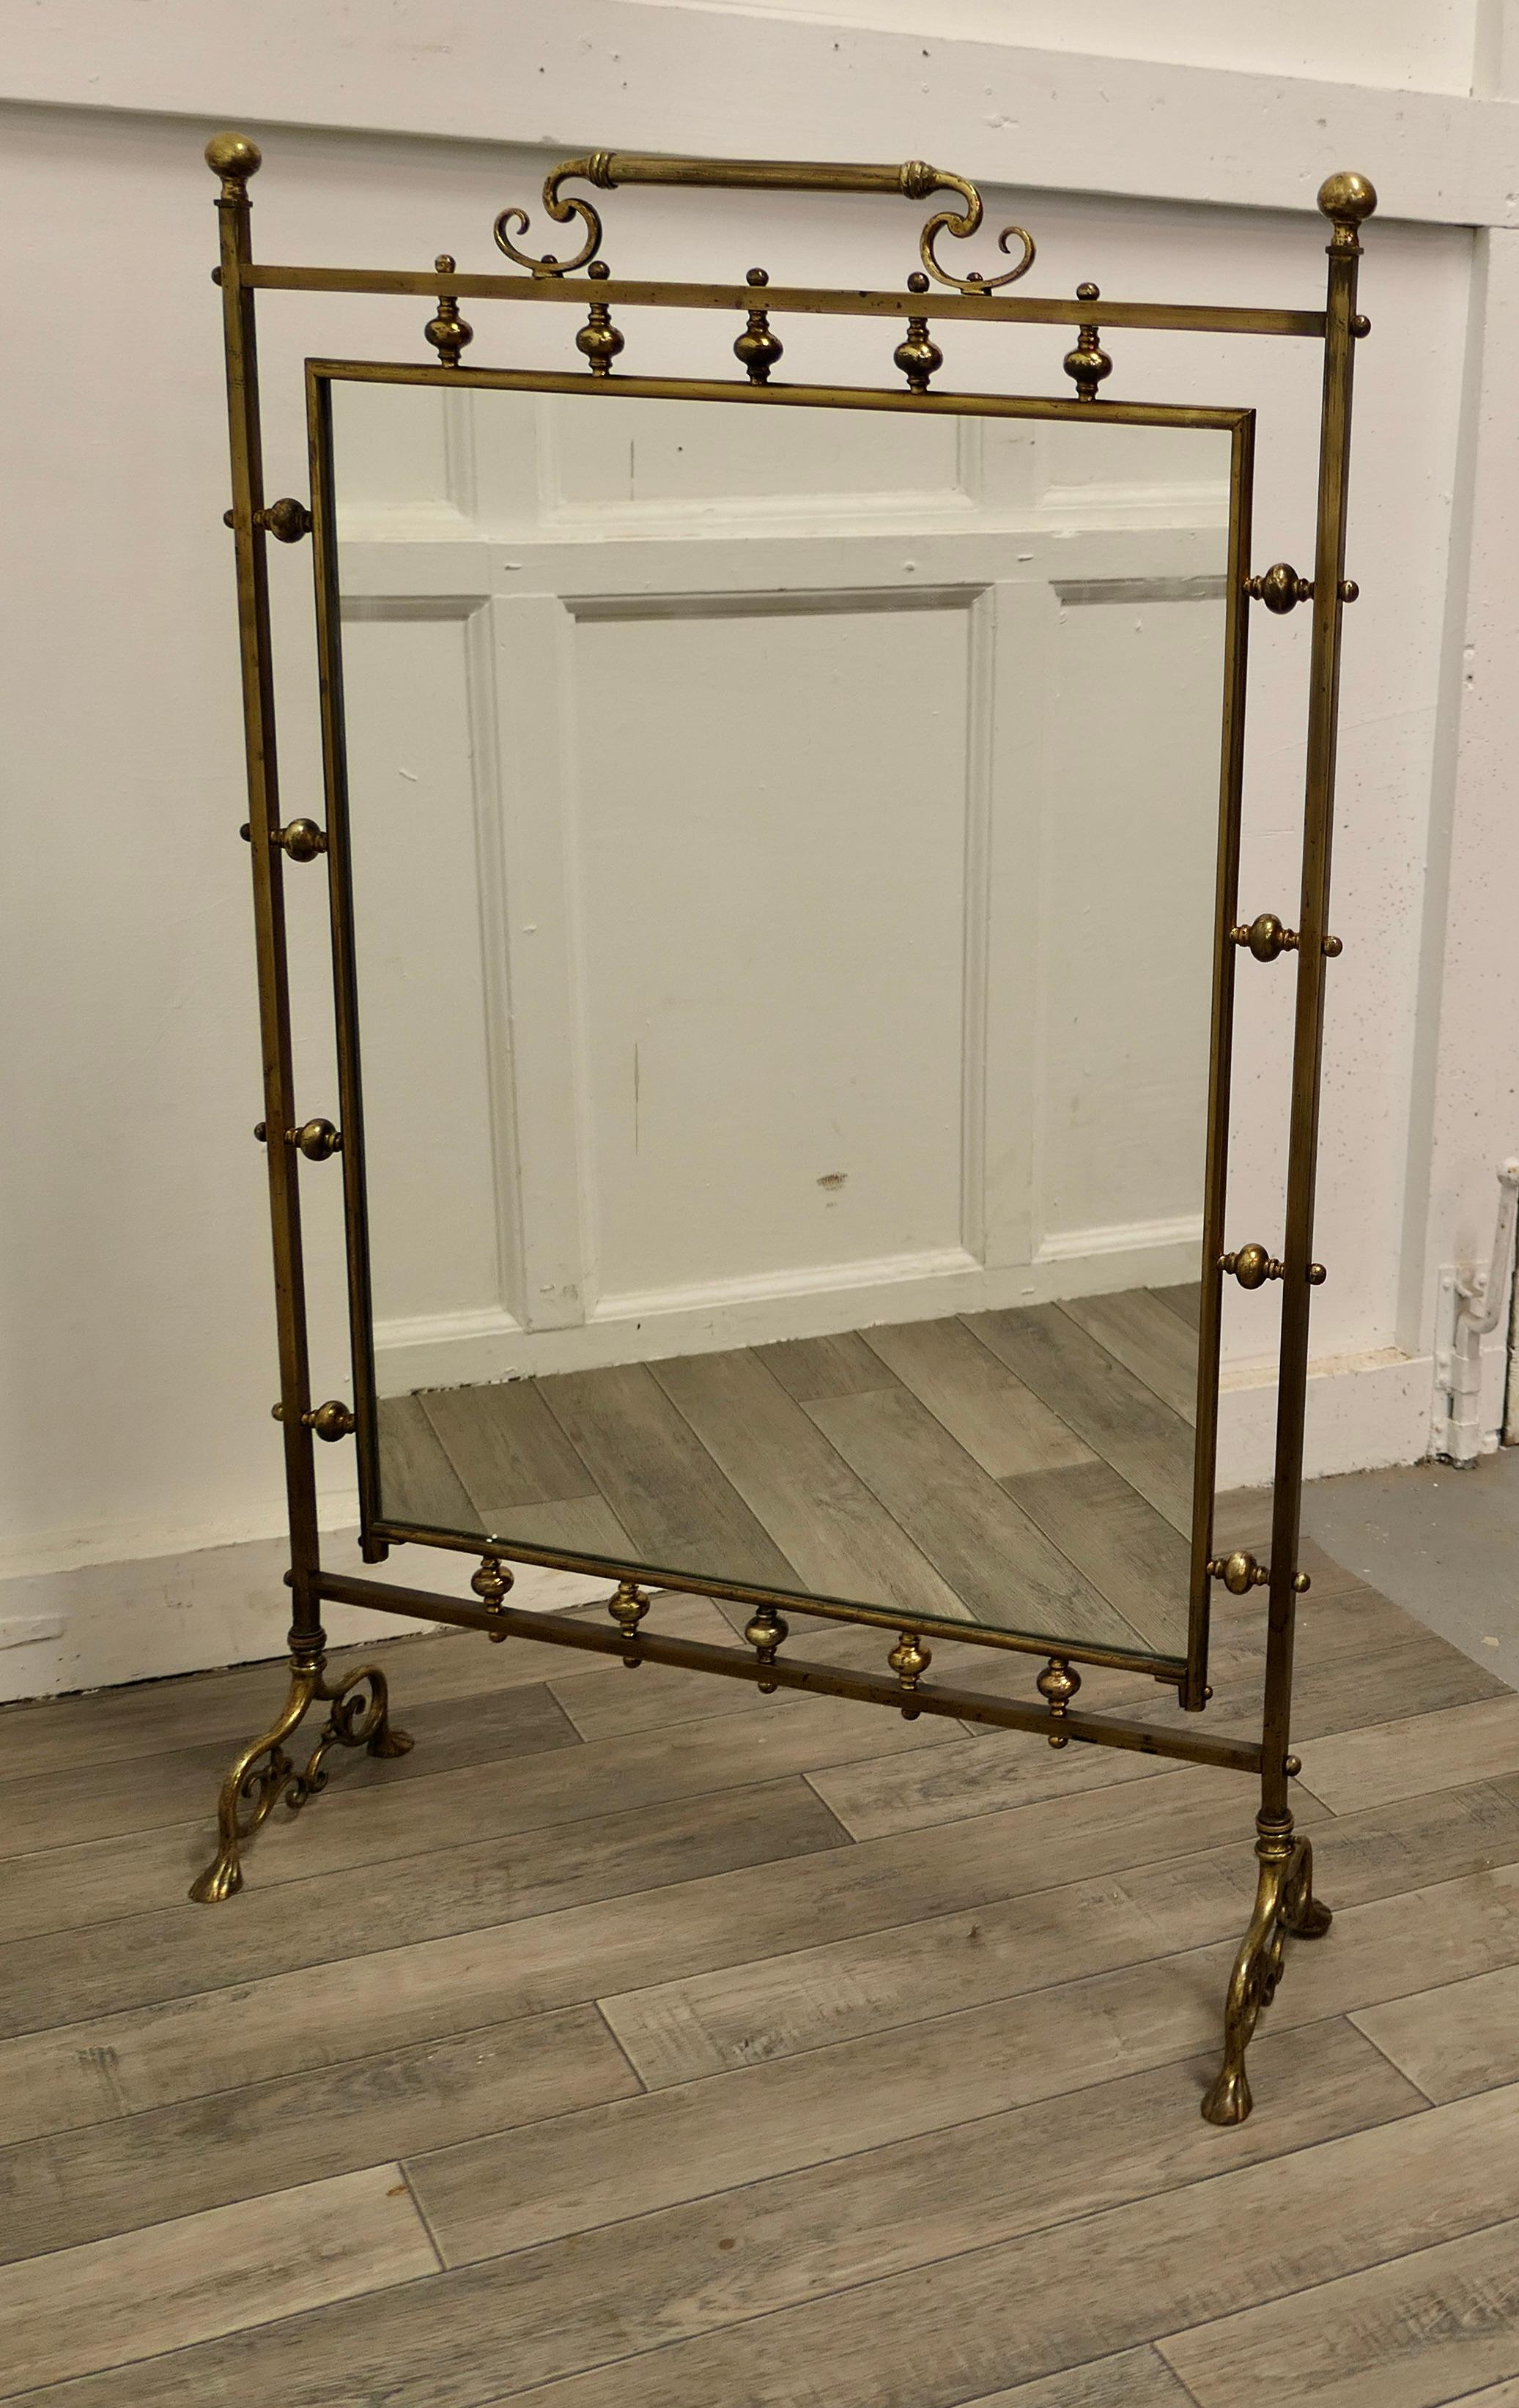 A very large Art Nouveau brass mirrored fire screen.

This is a very decorative fire screen it has an ornate brass stand, with a scroll handle and matching feet
The screen is set with a new mirror and it is all in good sound condition, it is